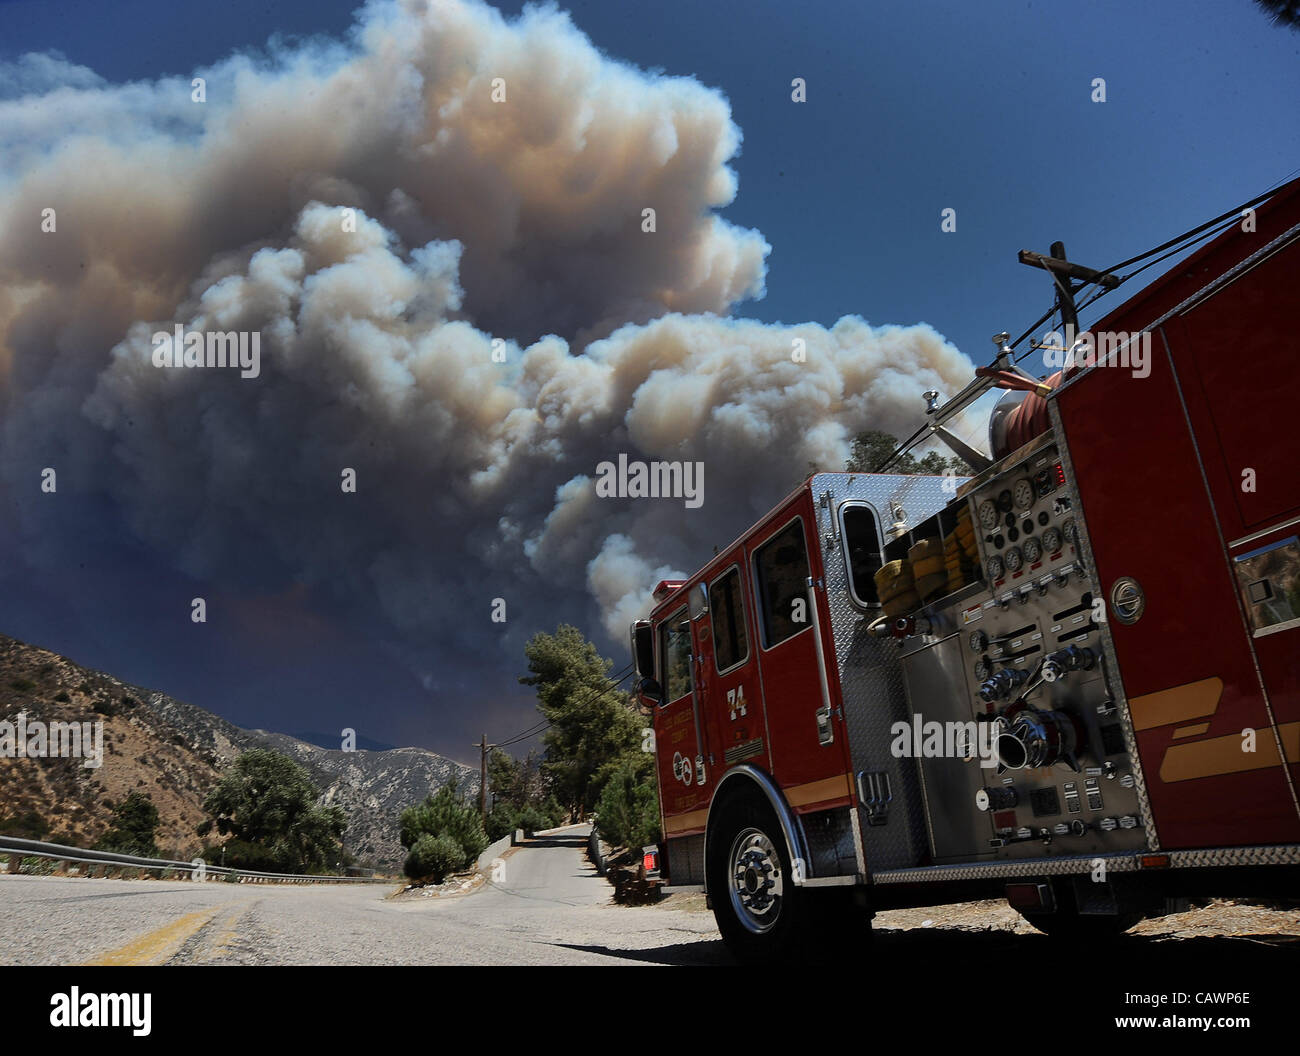 The Station fire burn through Big Tujunga Canyon destroying several homes  during the 4th day of the fire. The fire has burn over 20,000+ acres.  Angels National Forest CA. Aug 29,2009 Photo